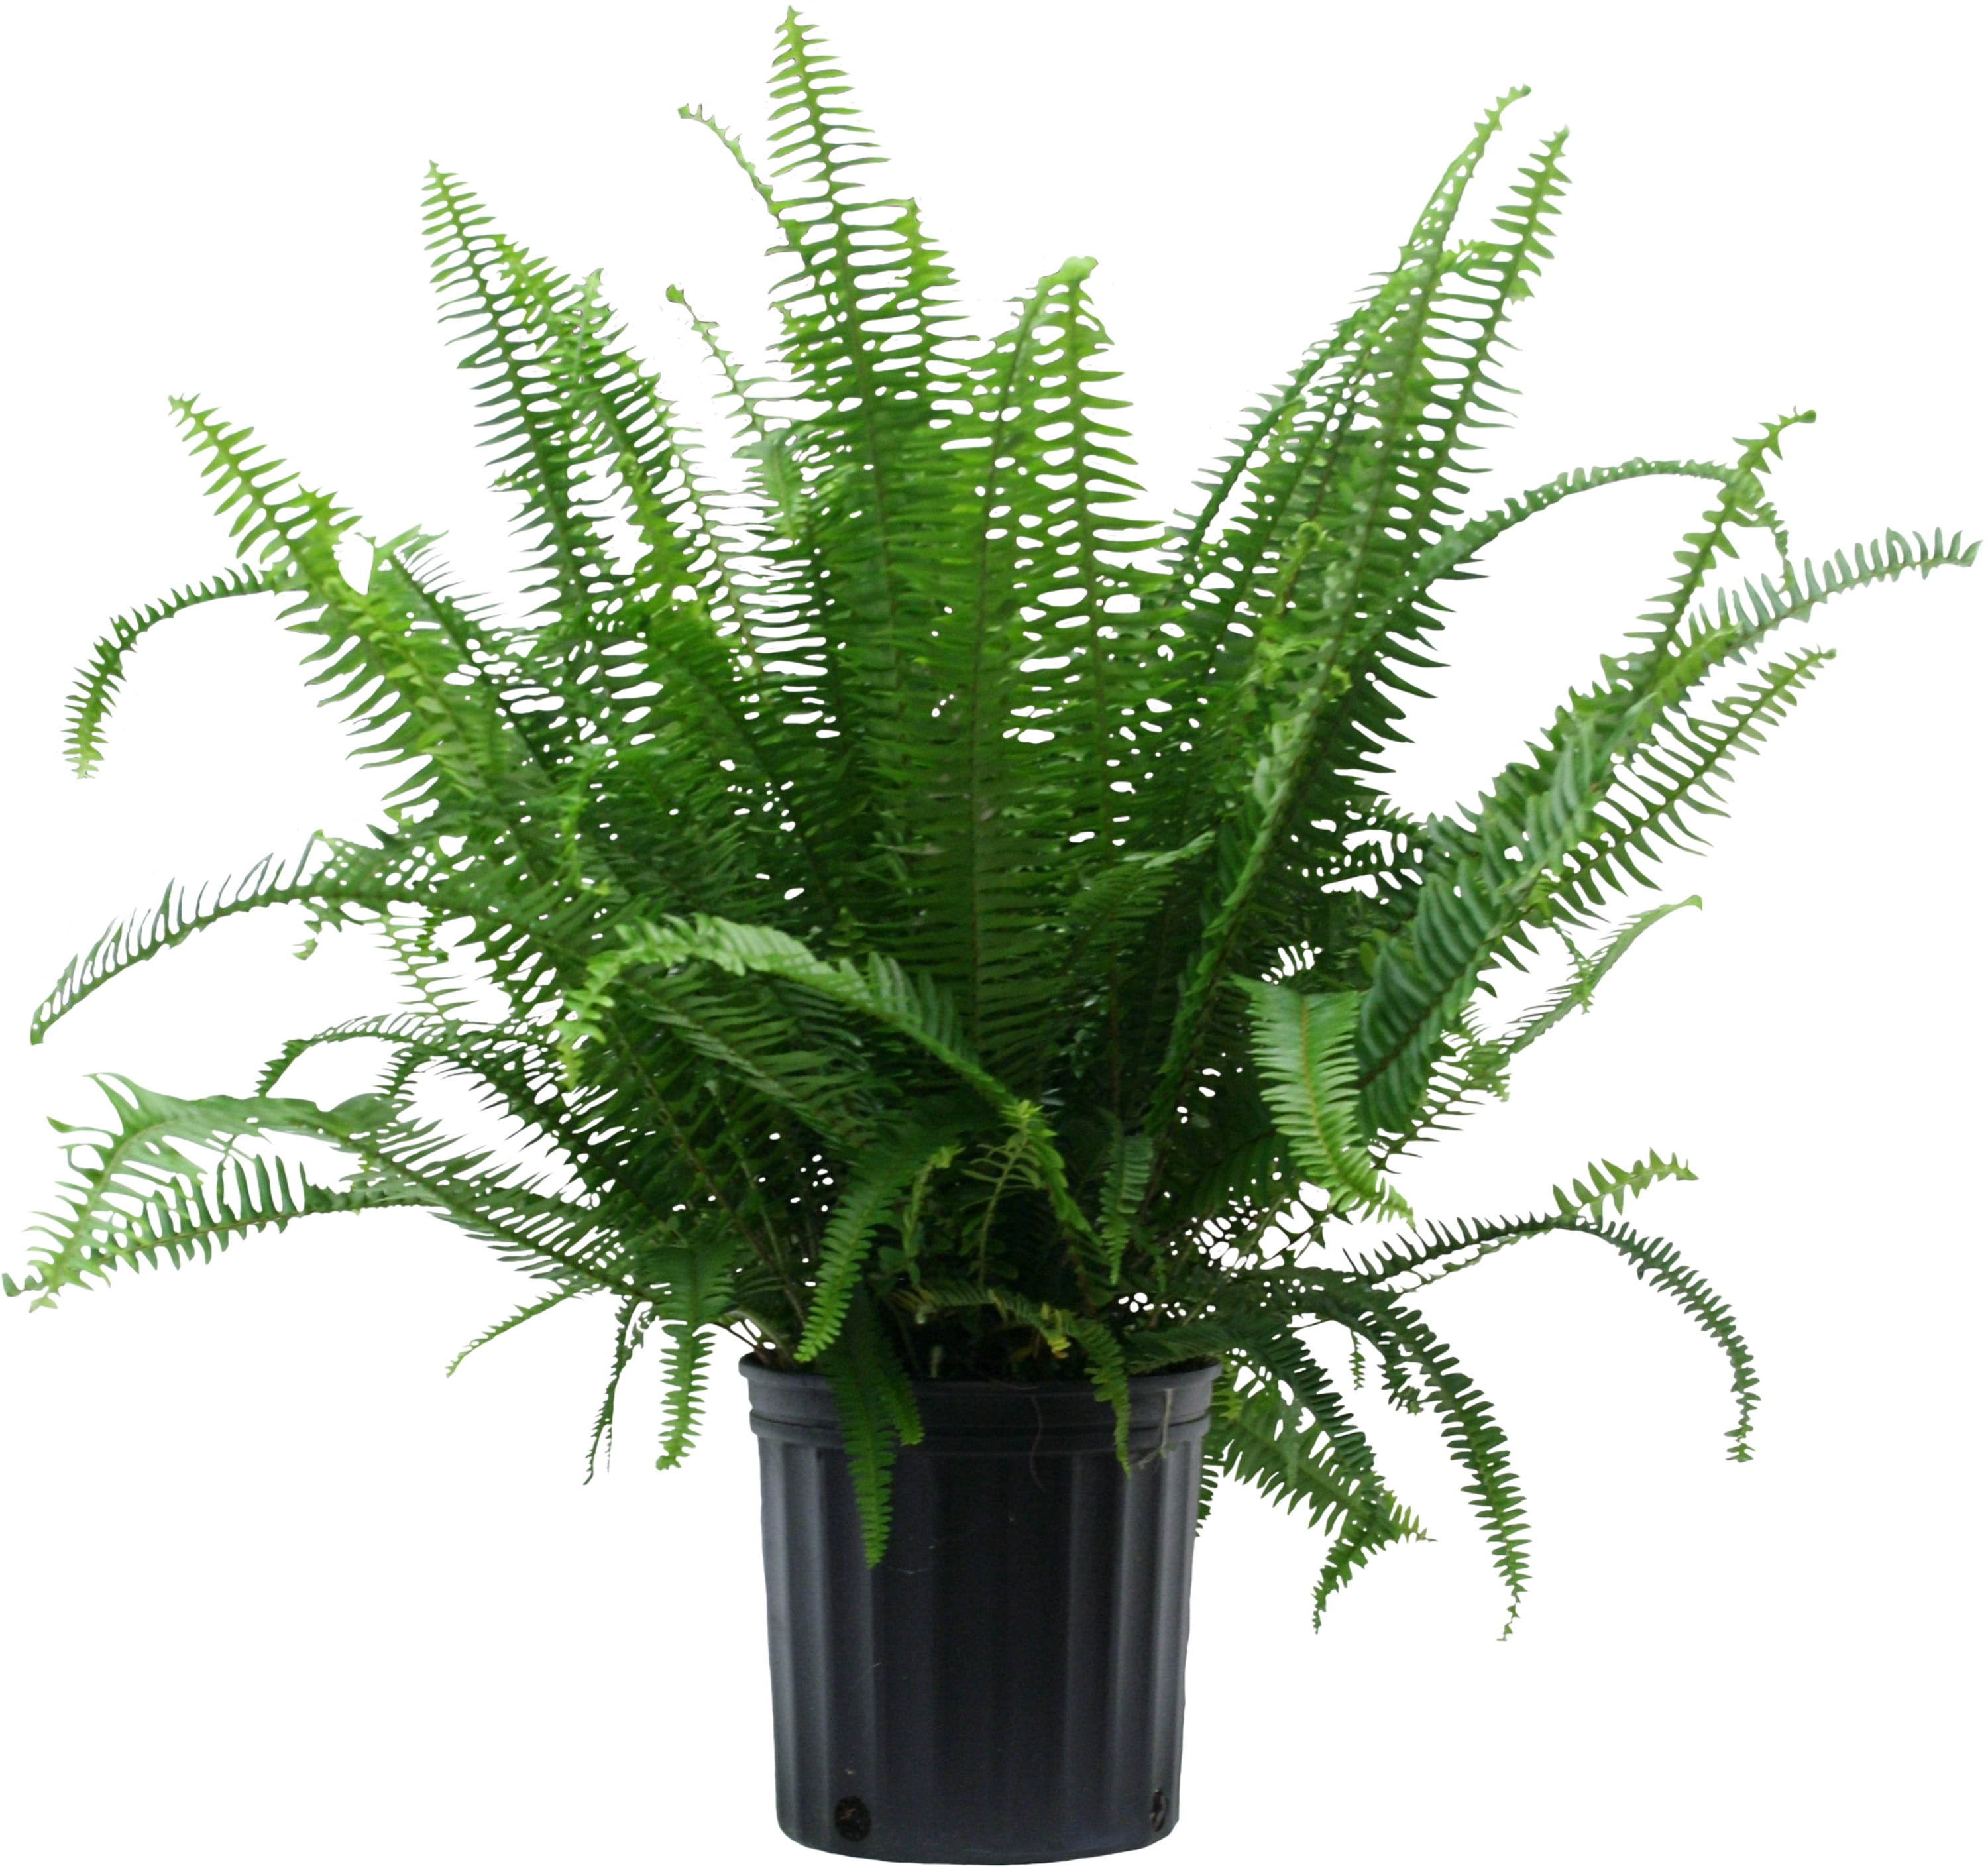 2' Tall Costa Farms Green Kimberly Queen Fern Live Indoor Potted Plant $24.50 + Free S&H w/ Walmart+ or $35+